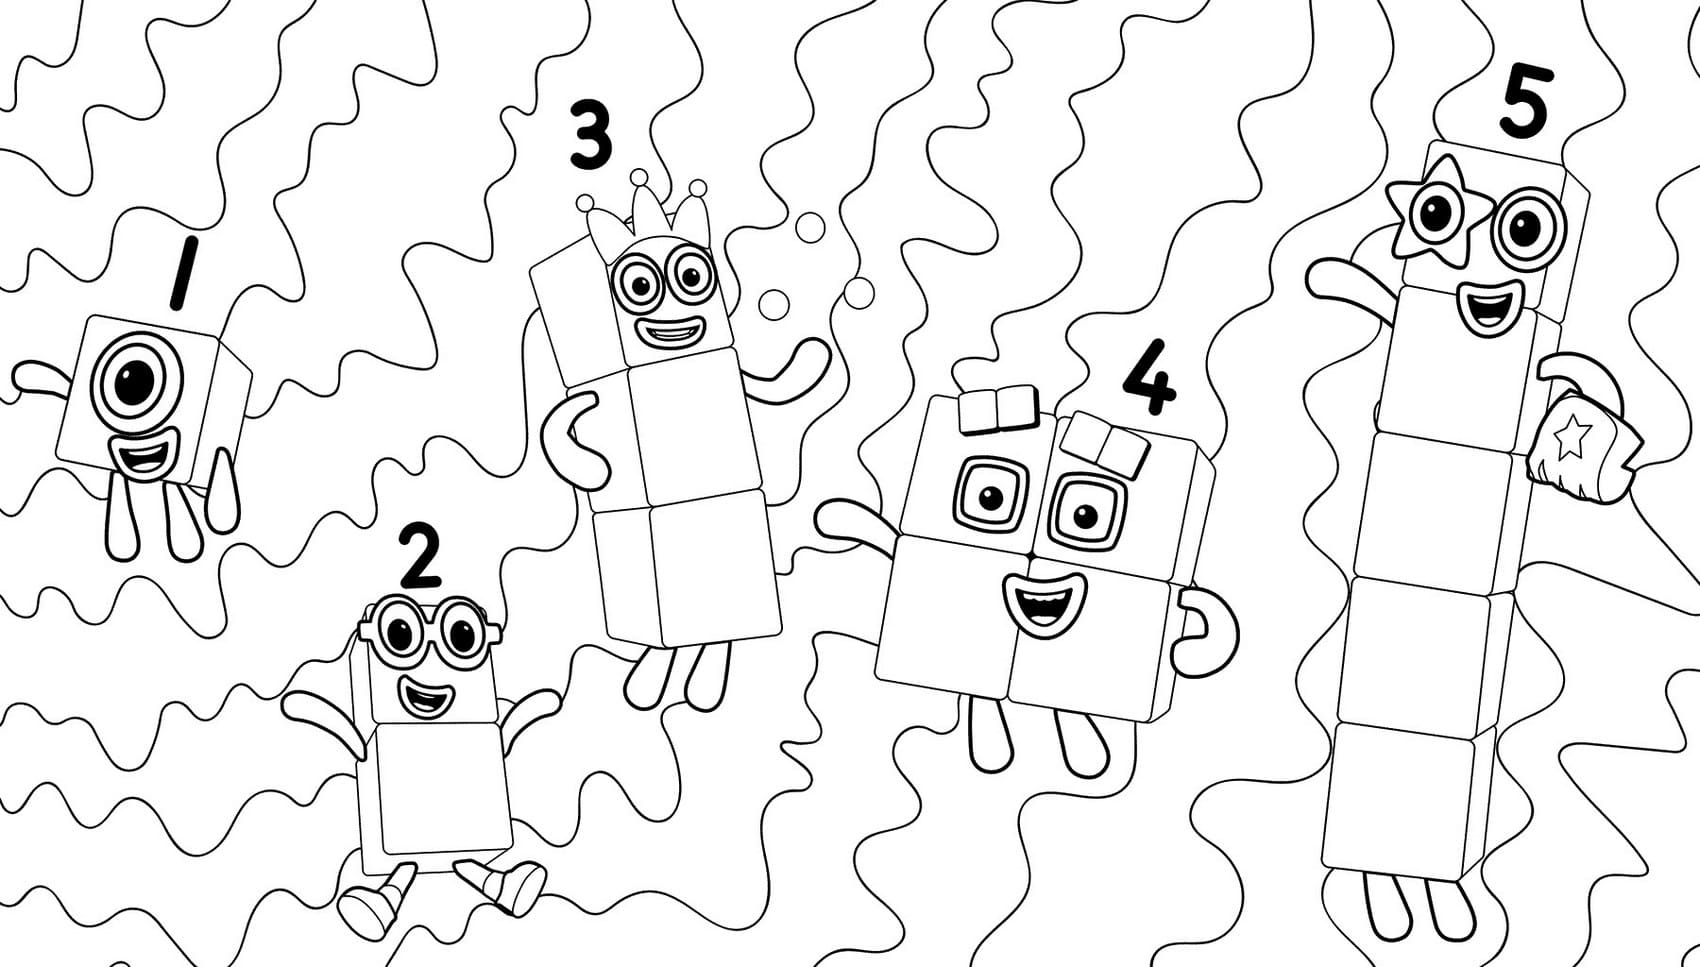 Numberblocks coloring pages - Printable coloring pages for Kids